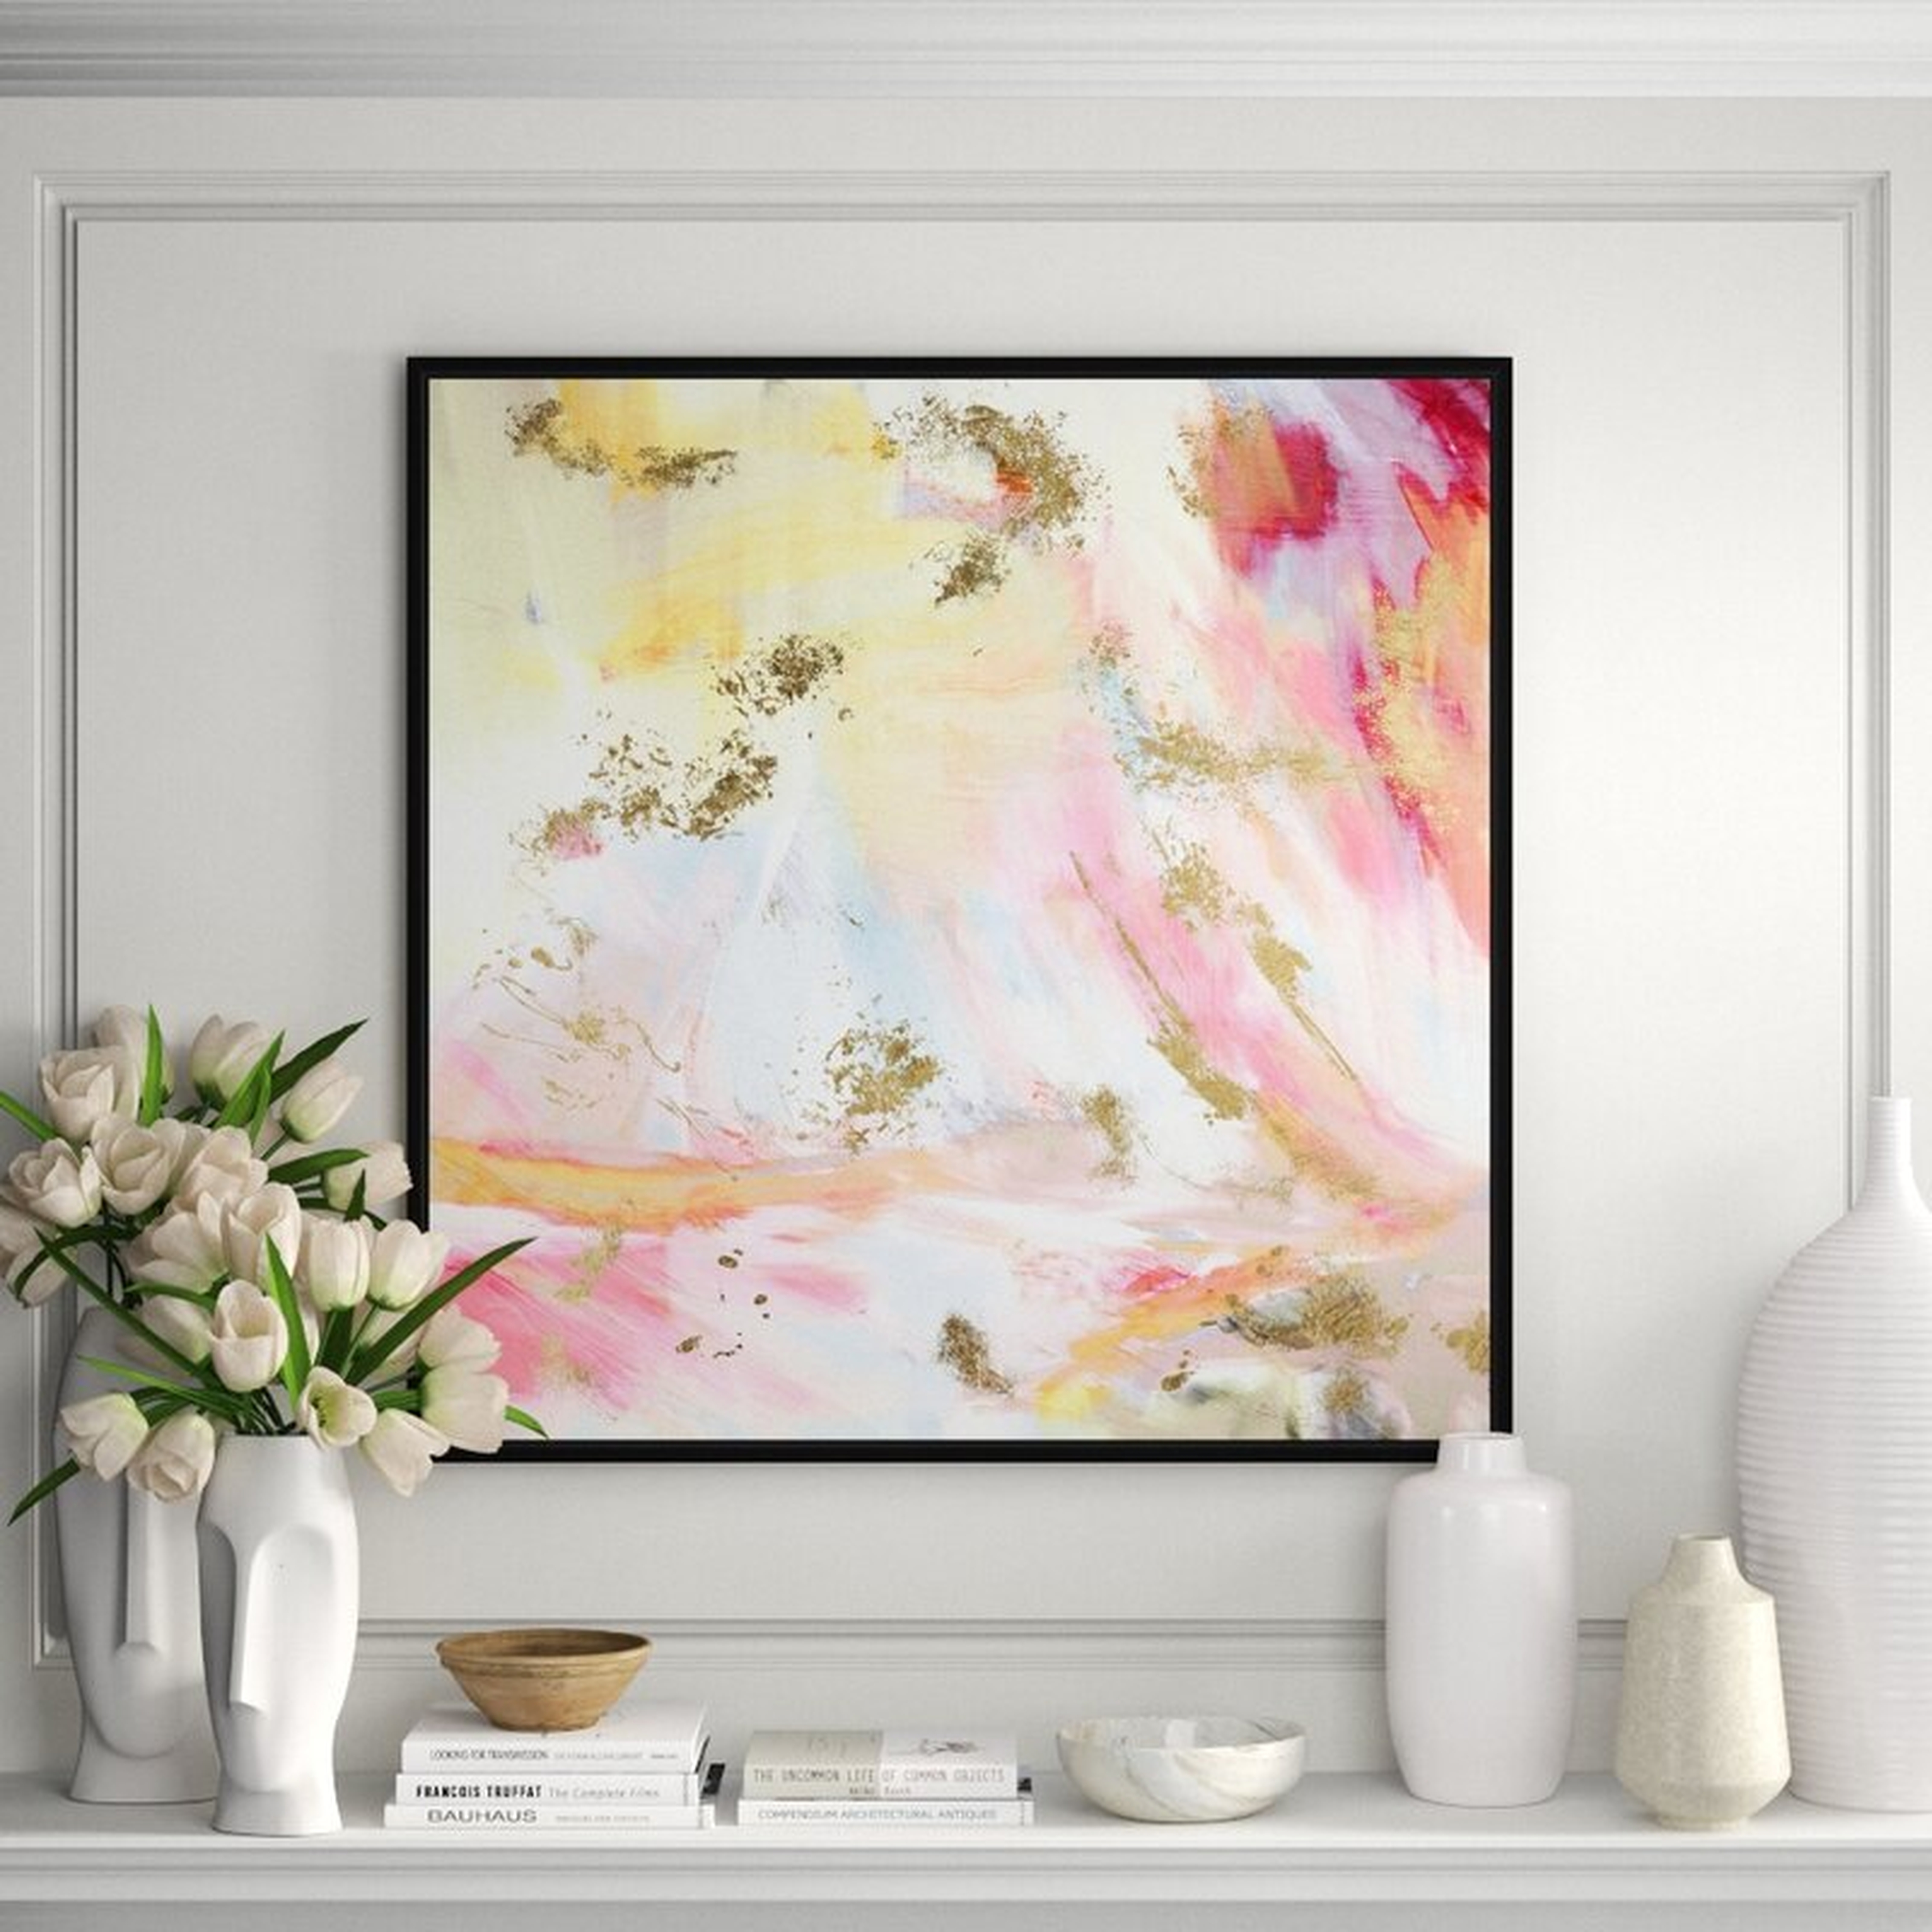 JBass Grand Gallery Collection Pastel Mist - Framed Graphic Art on Canvas - Perigold